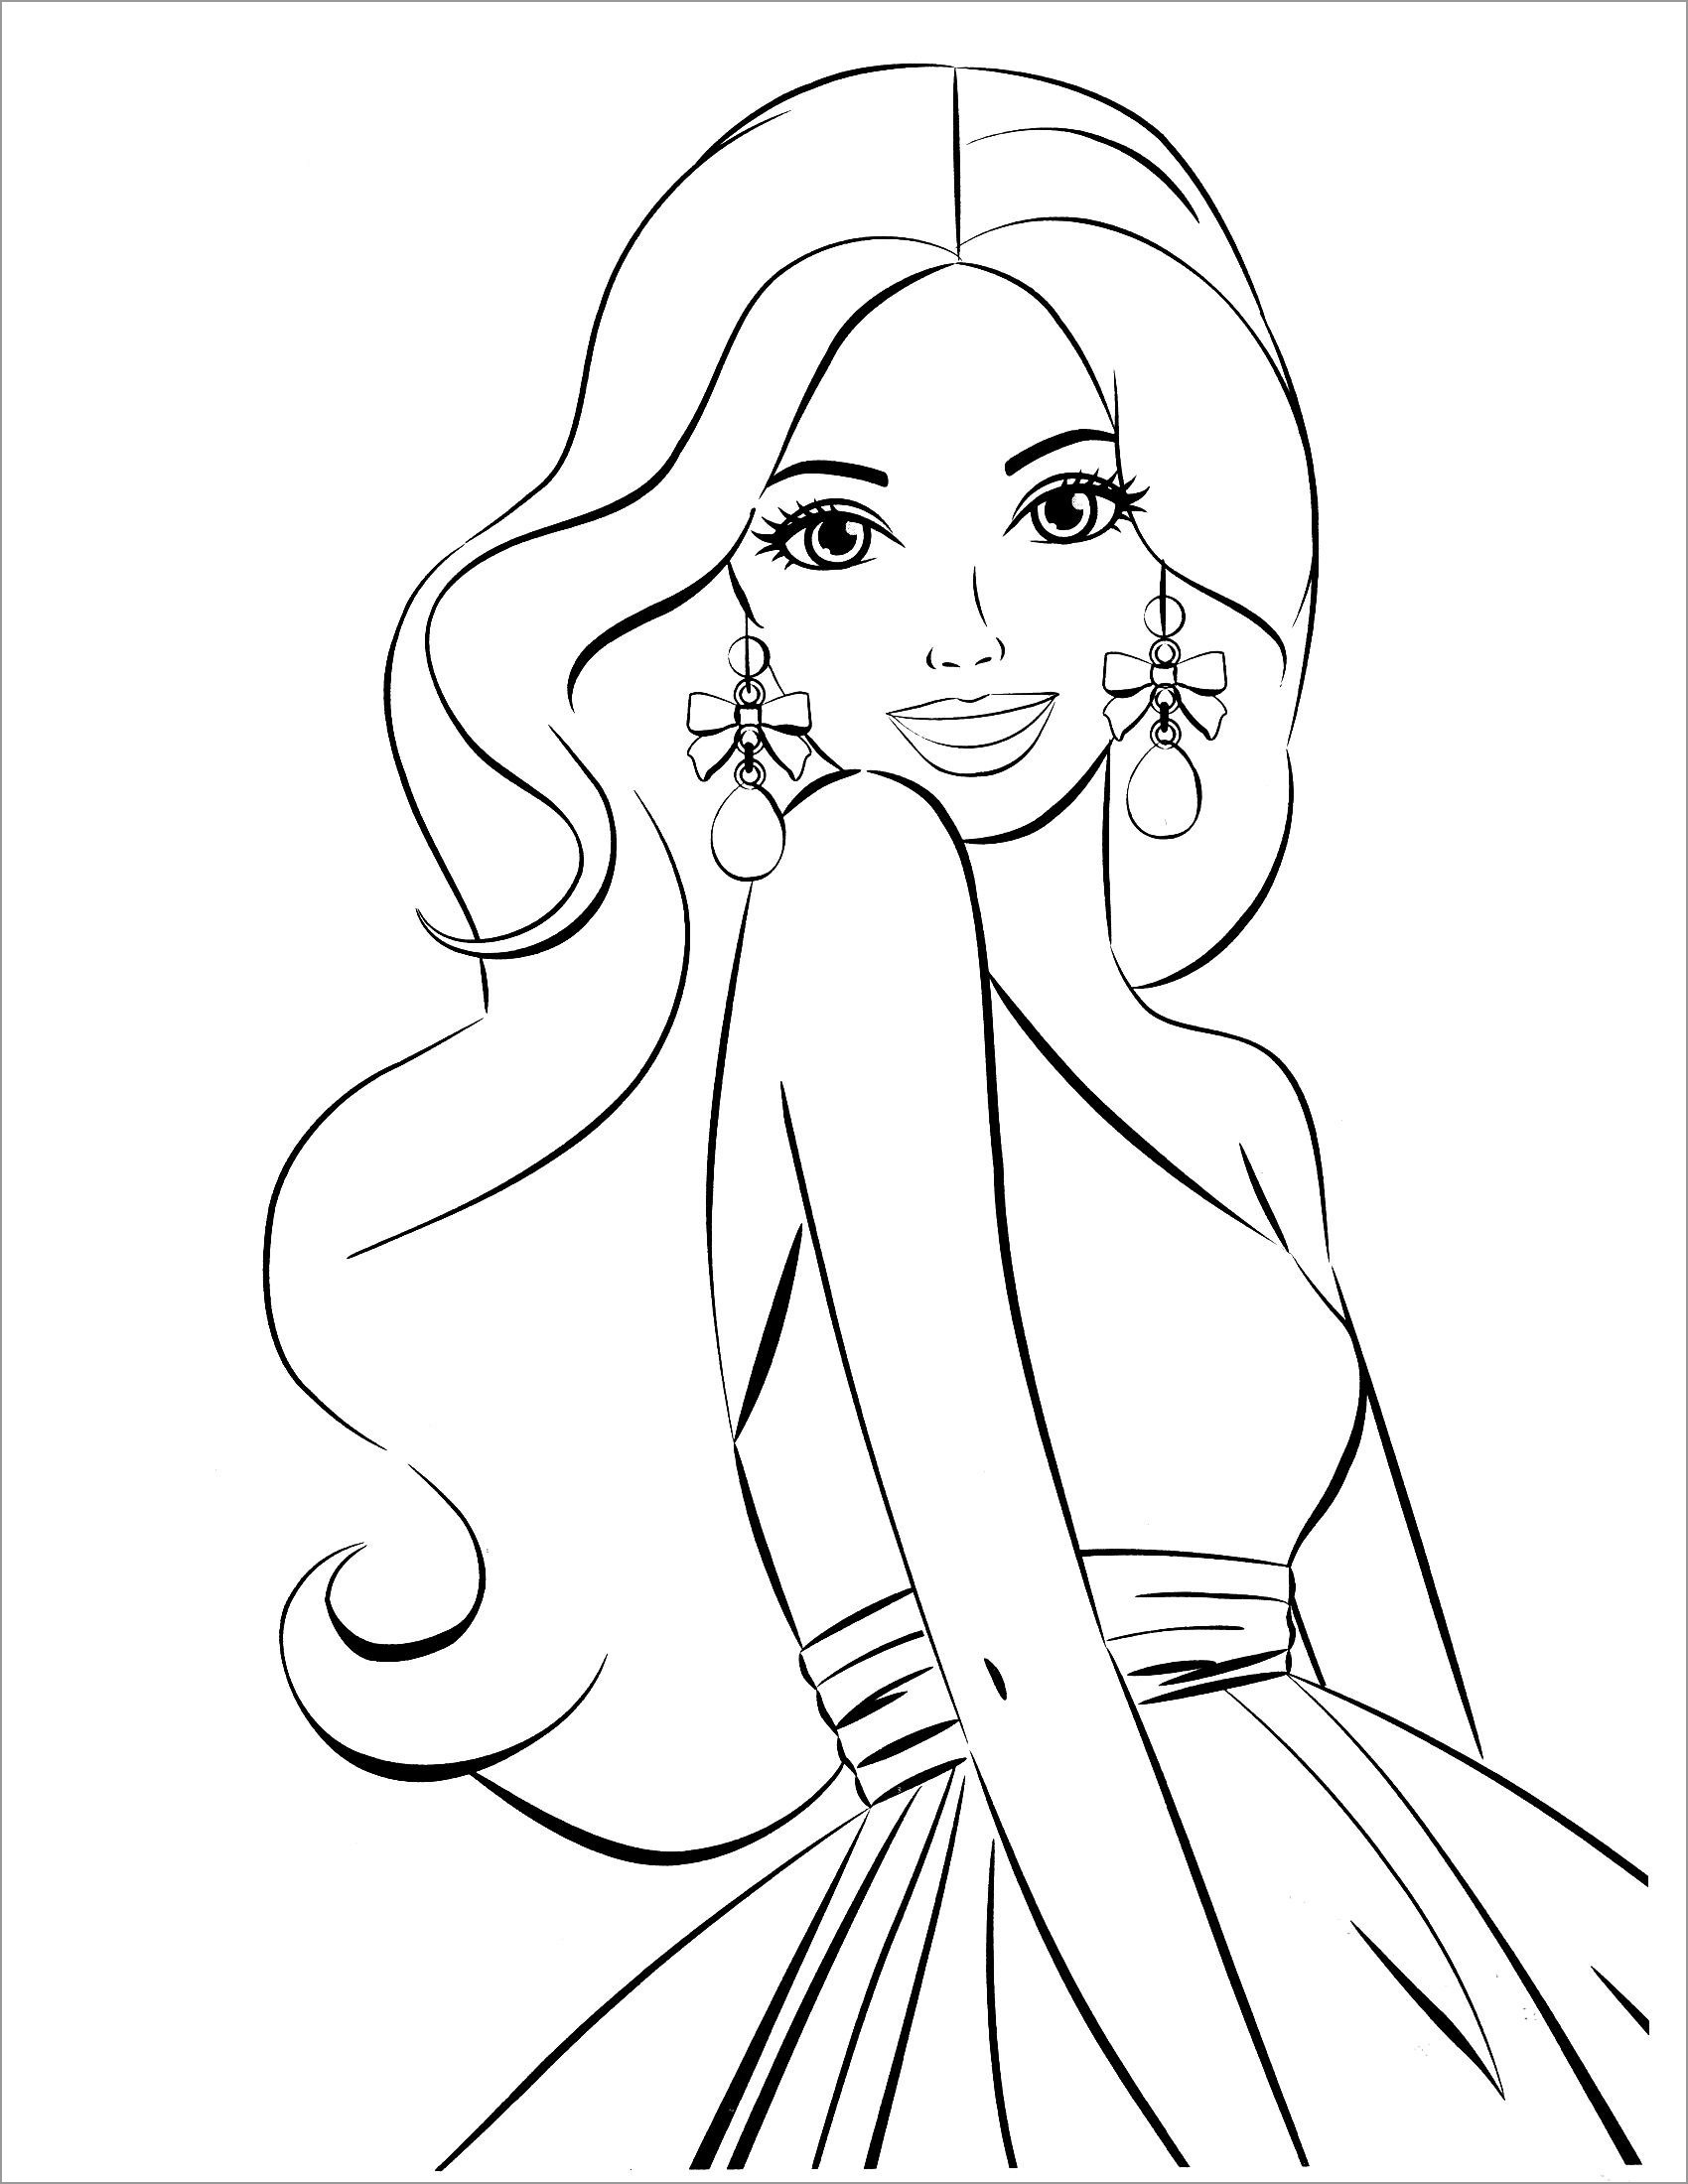 Barbie with Koala Coloring Page   ColoringBay